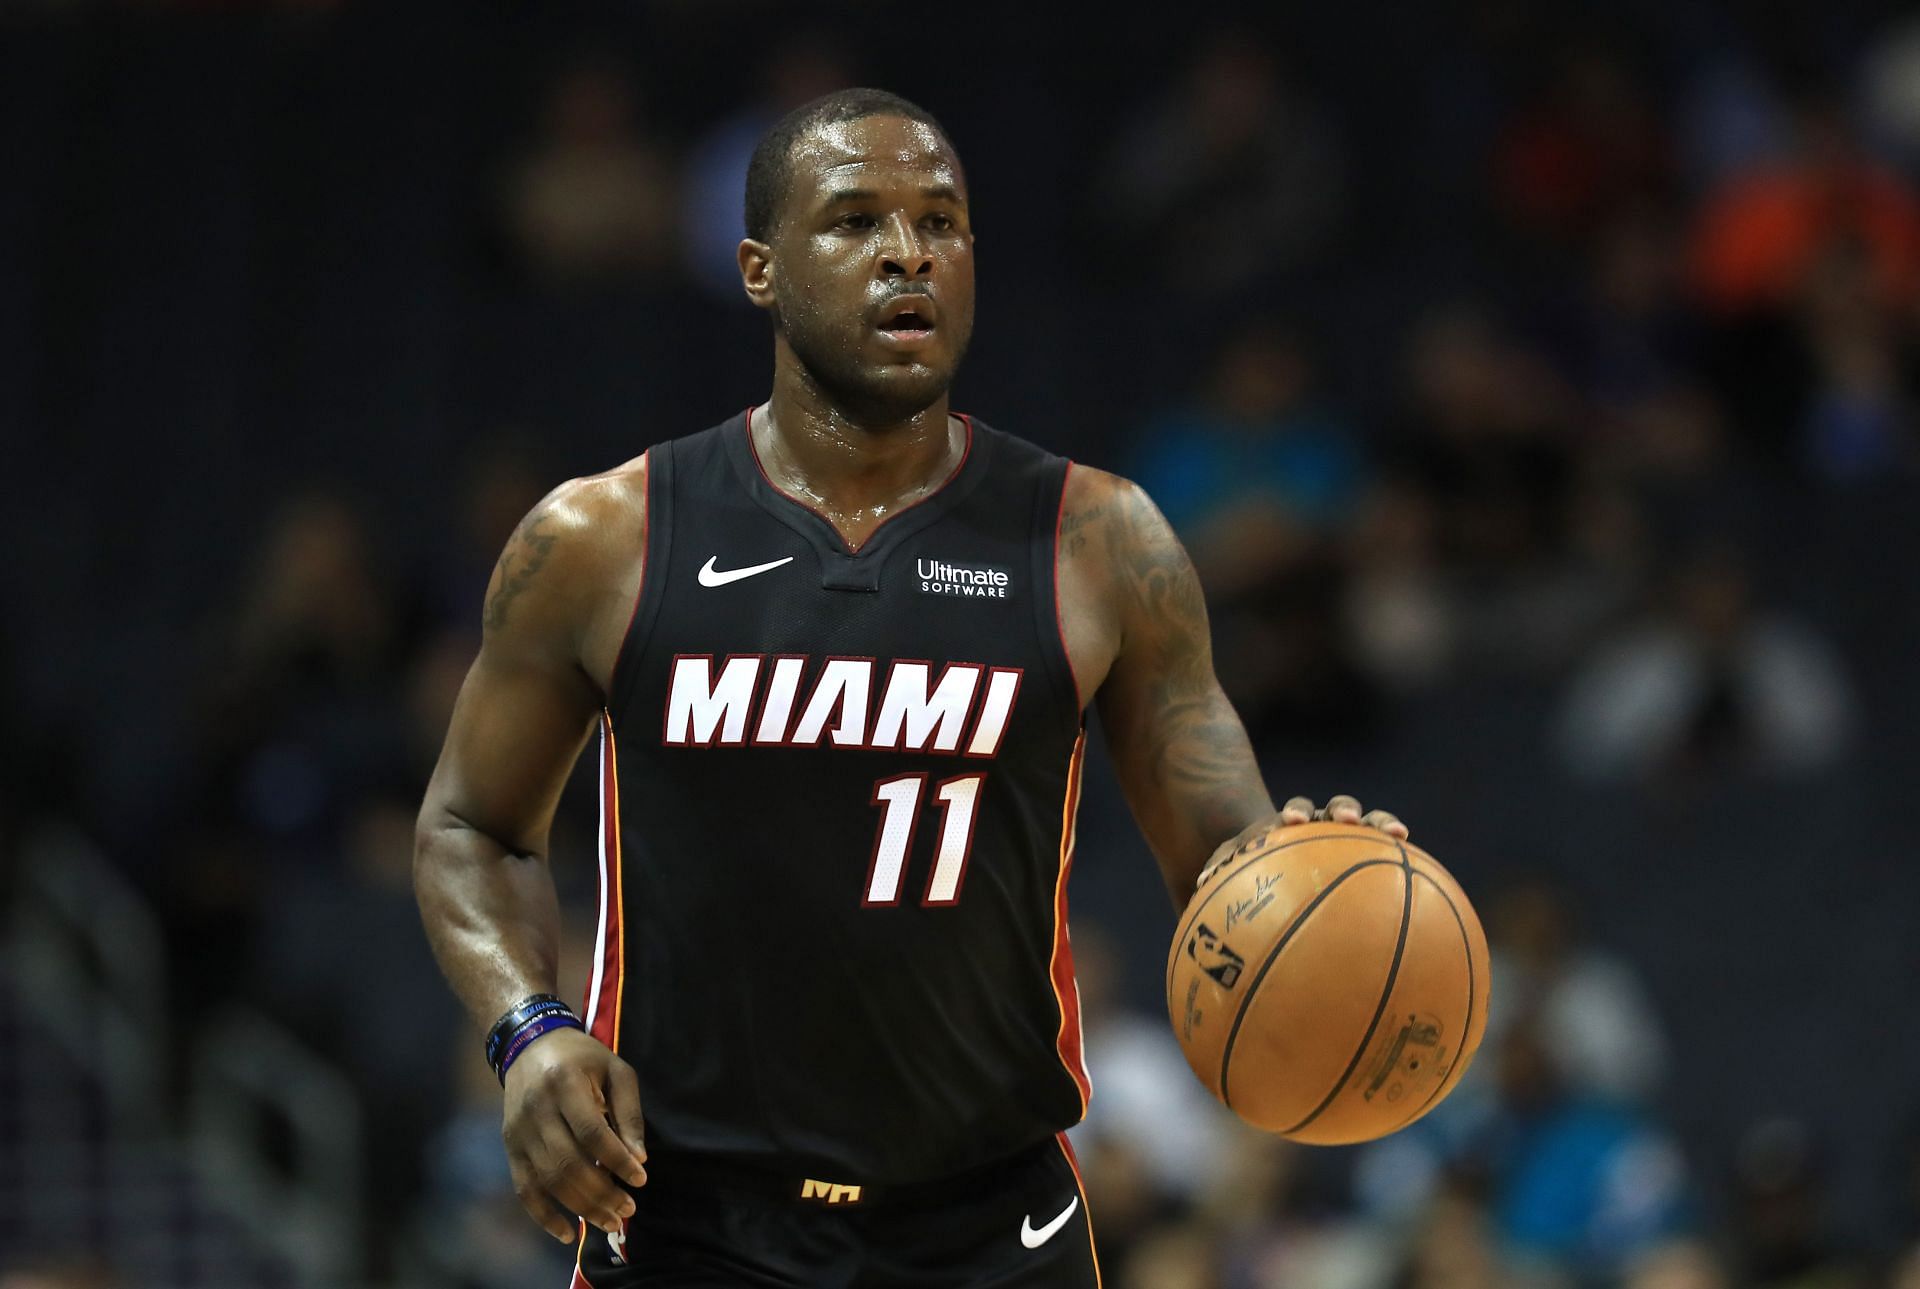 Dion Waiters is one of many NBA players who are Muslims (Image via Getty Images)